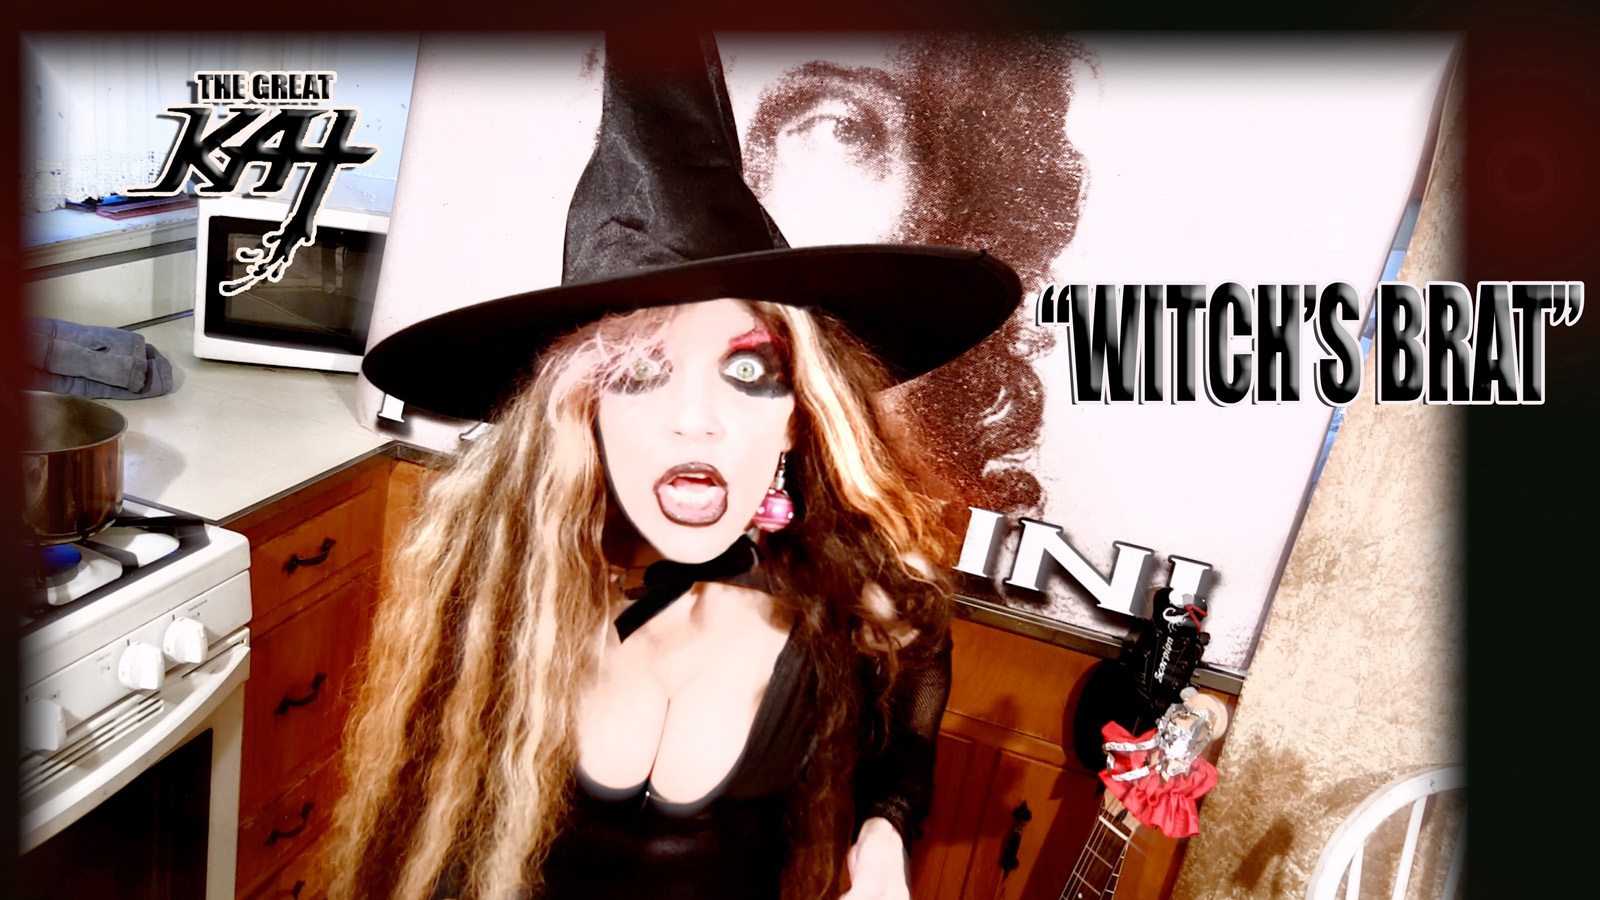 "THE WITCH'S BRAT"! From CHEF GREAT KAT COOKS PAGANINI'S RAVIOLI!